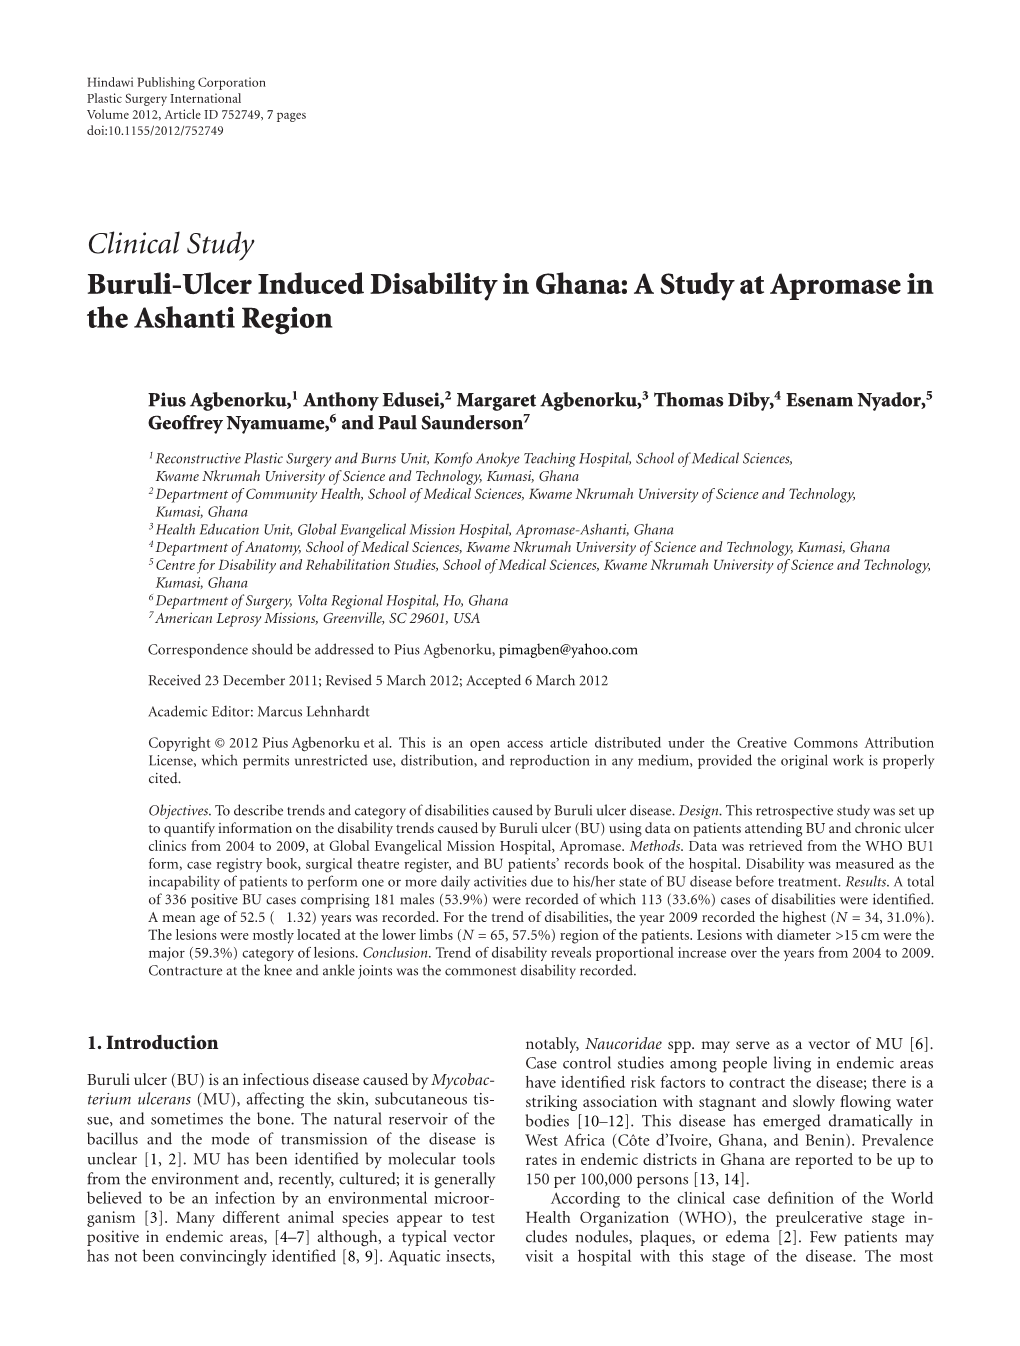 Buruli-Ulcer Induced Disability in Ghana: a Study at Apromase in the Ashanti Region